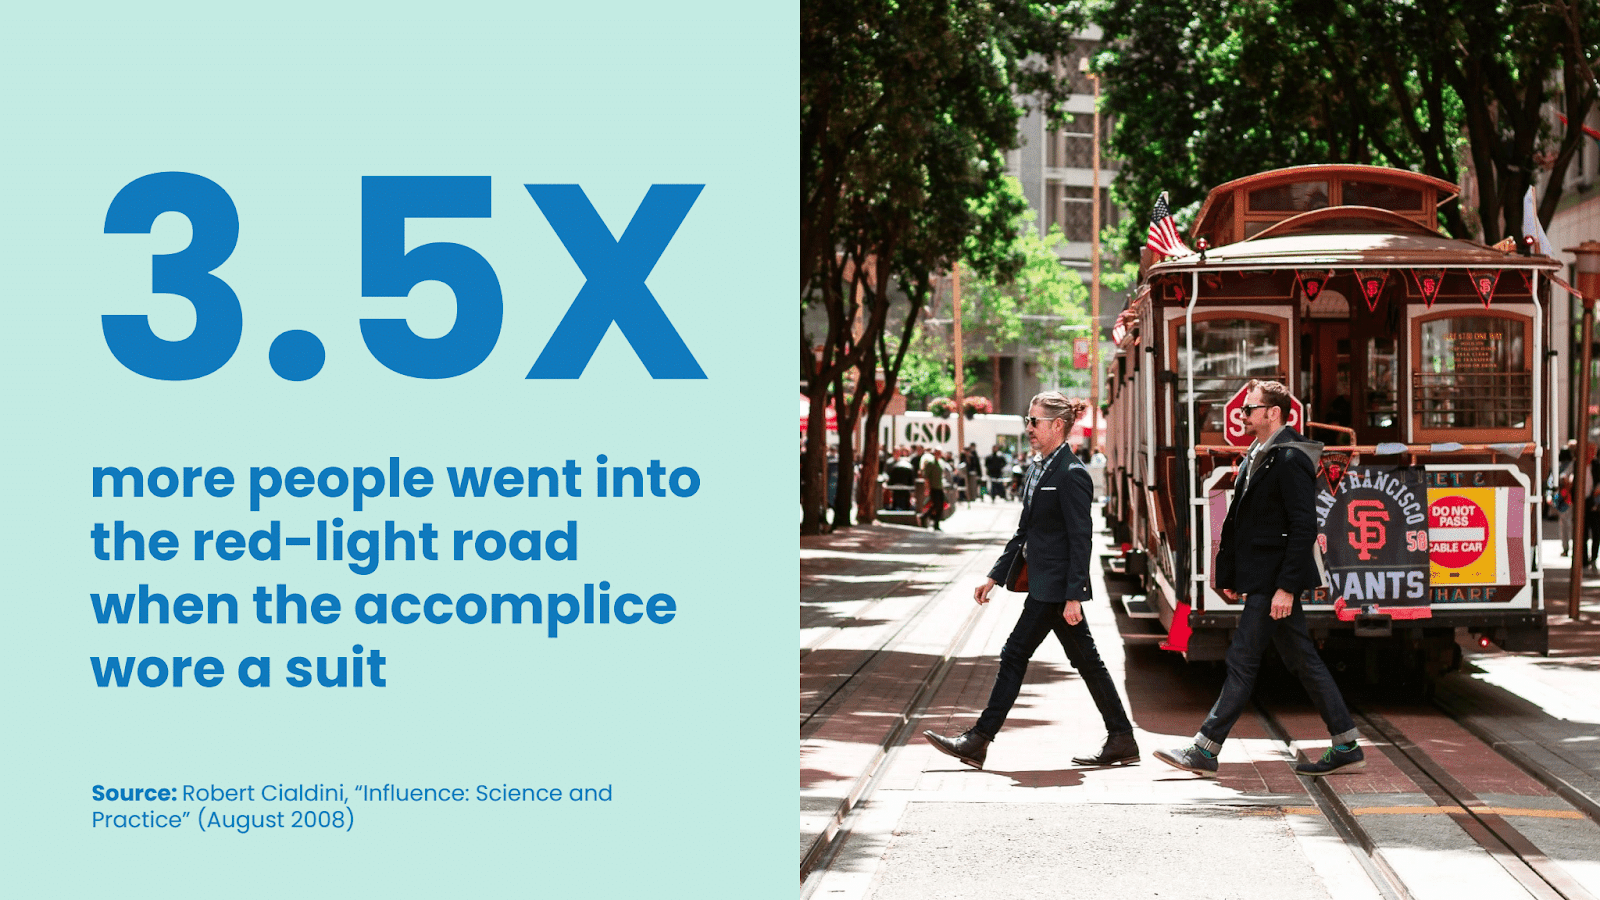 3.5x more people went into the red-light road when the accomplice wore a suit.